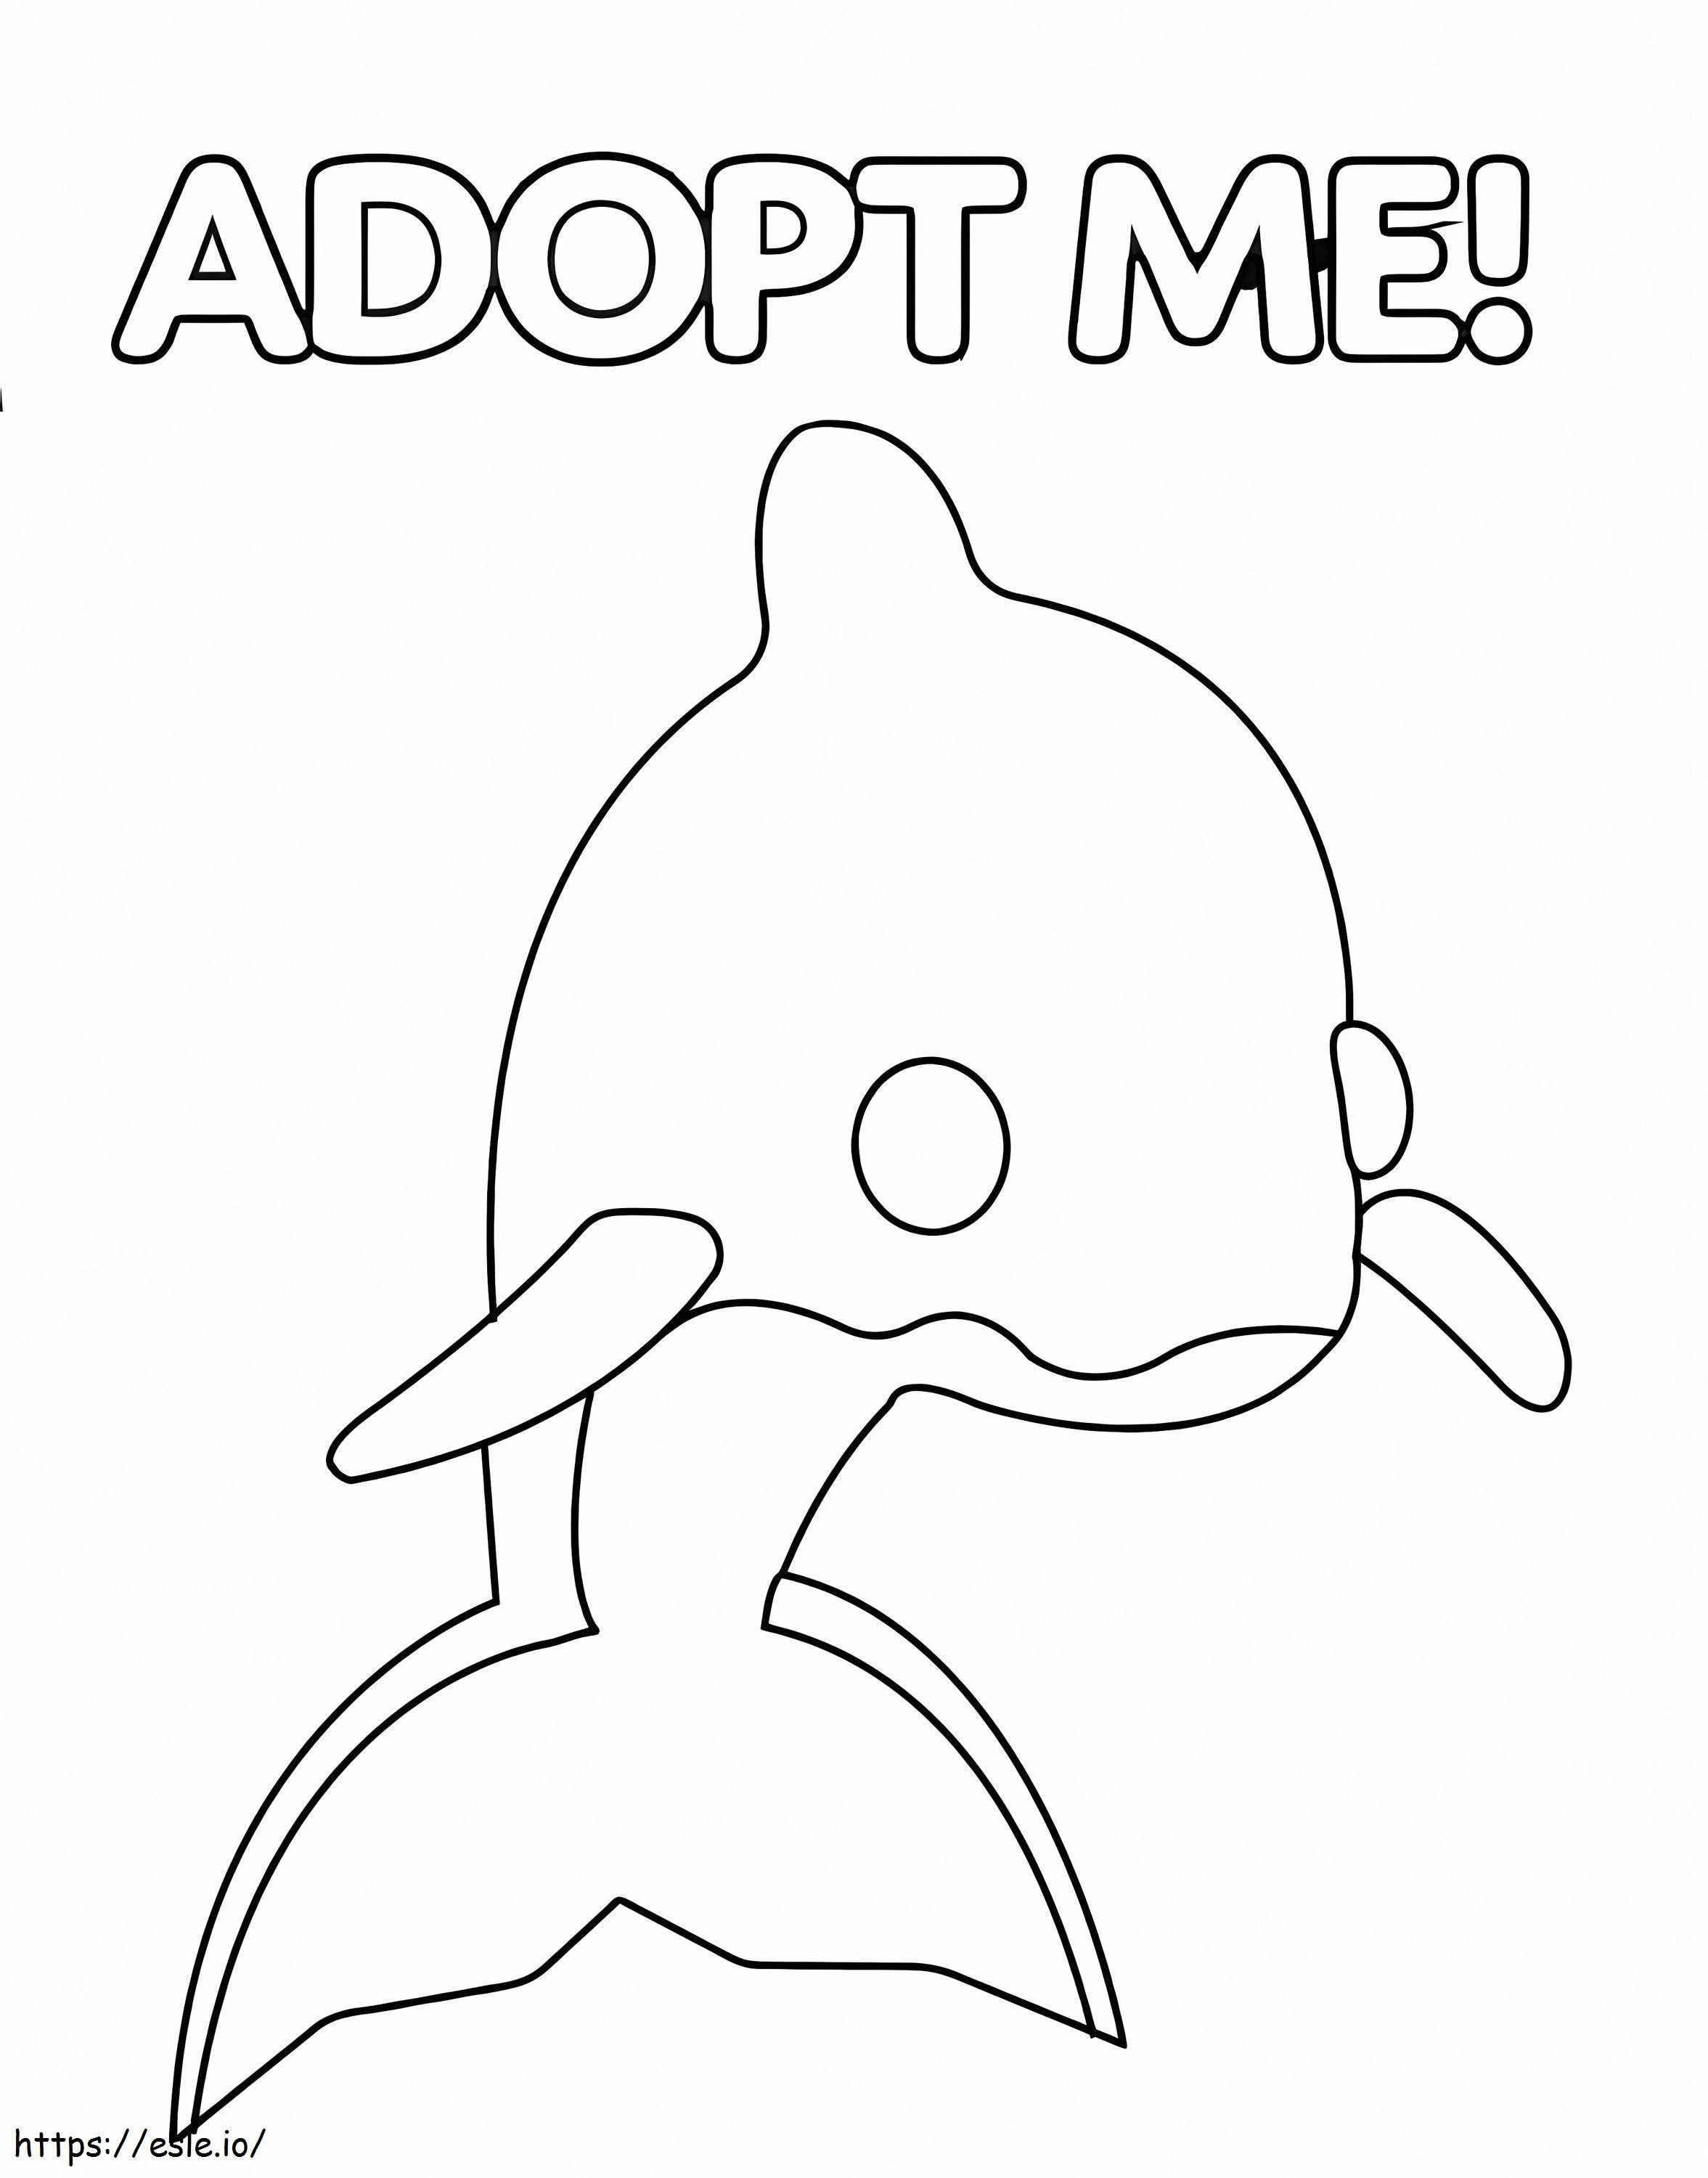 Dolphin Adopt Me coloring page